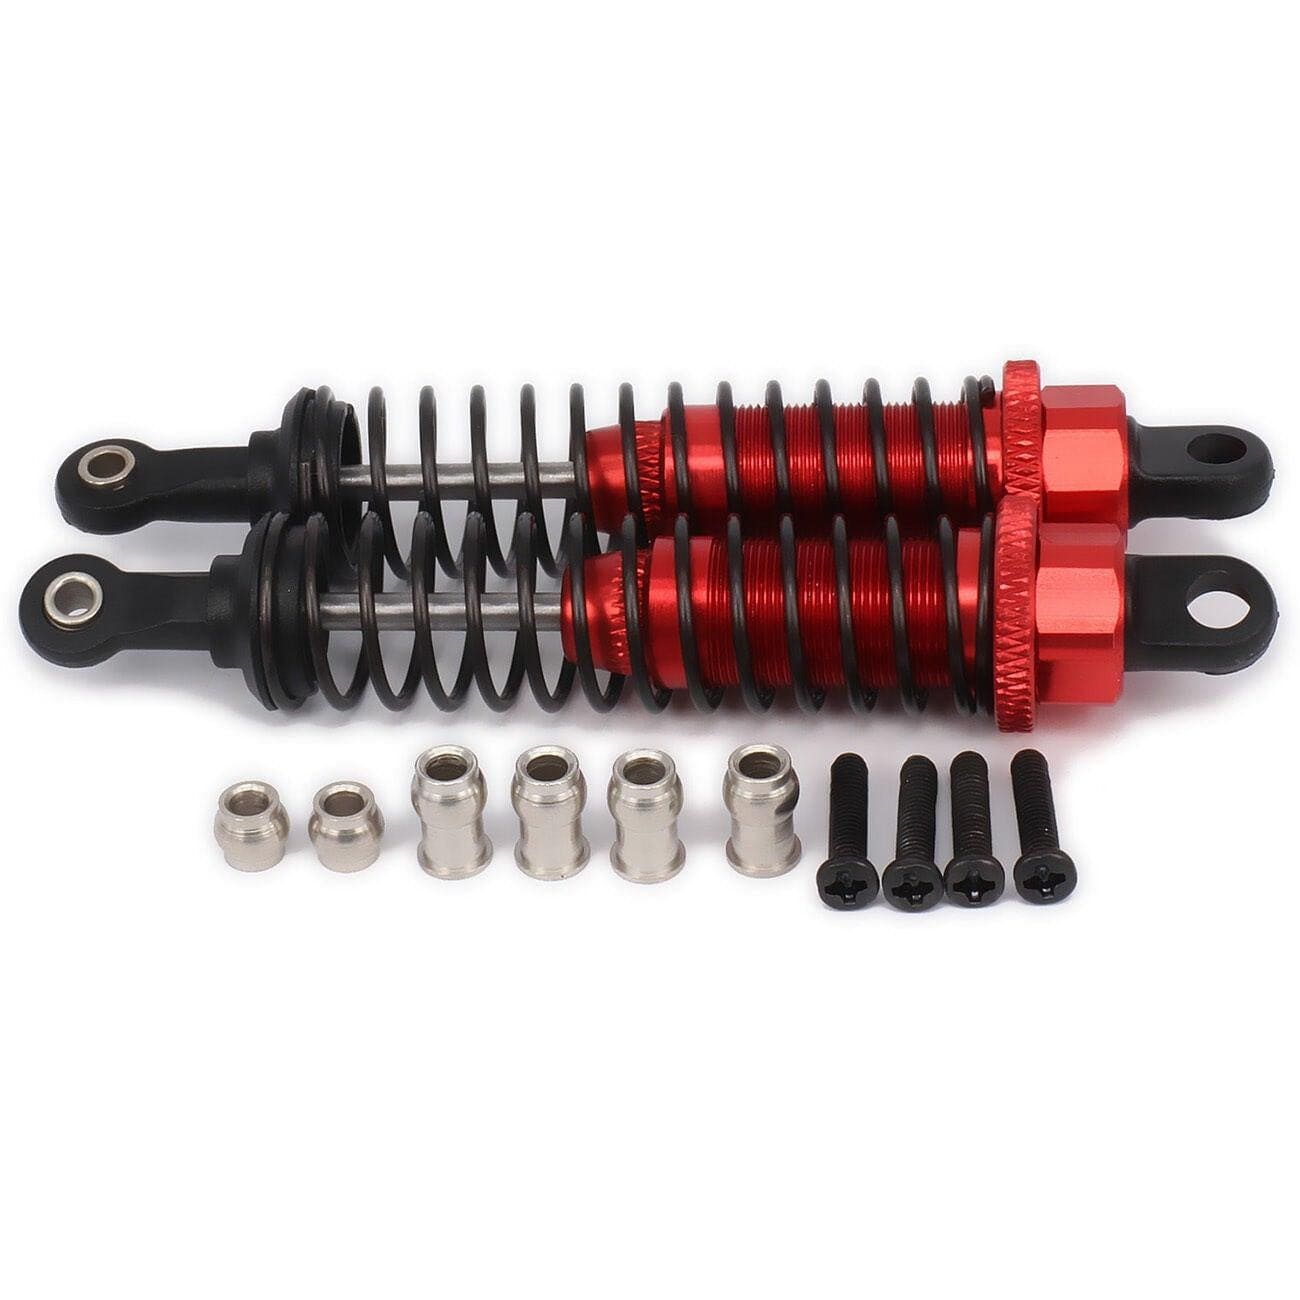 RCAWD RC CAR UPGRADE PARTS Red RCAWD 80mm Shock Absorber Damper Oil Adjustable Style for 1/16 Rc Car 2pcs